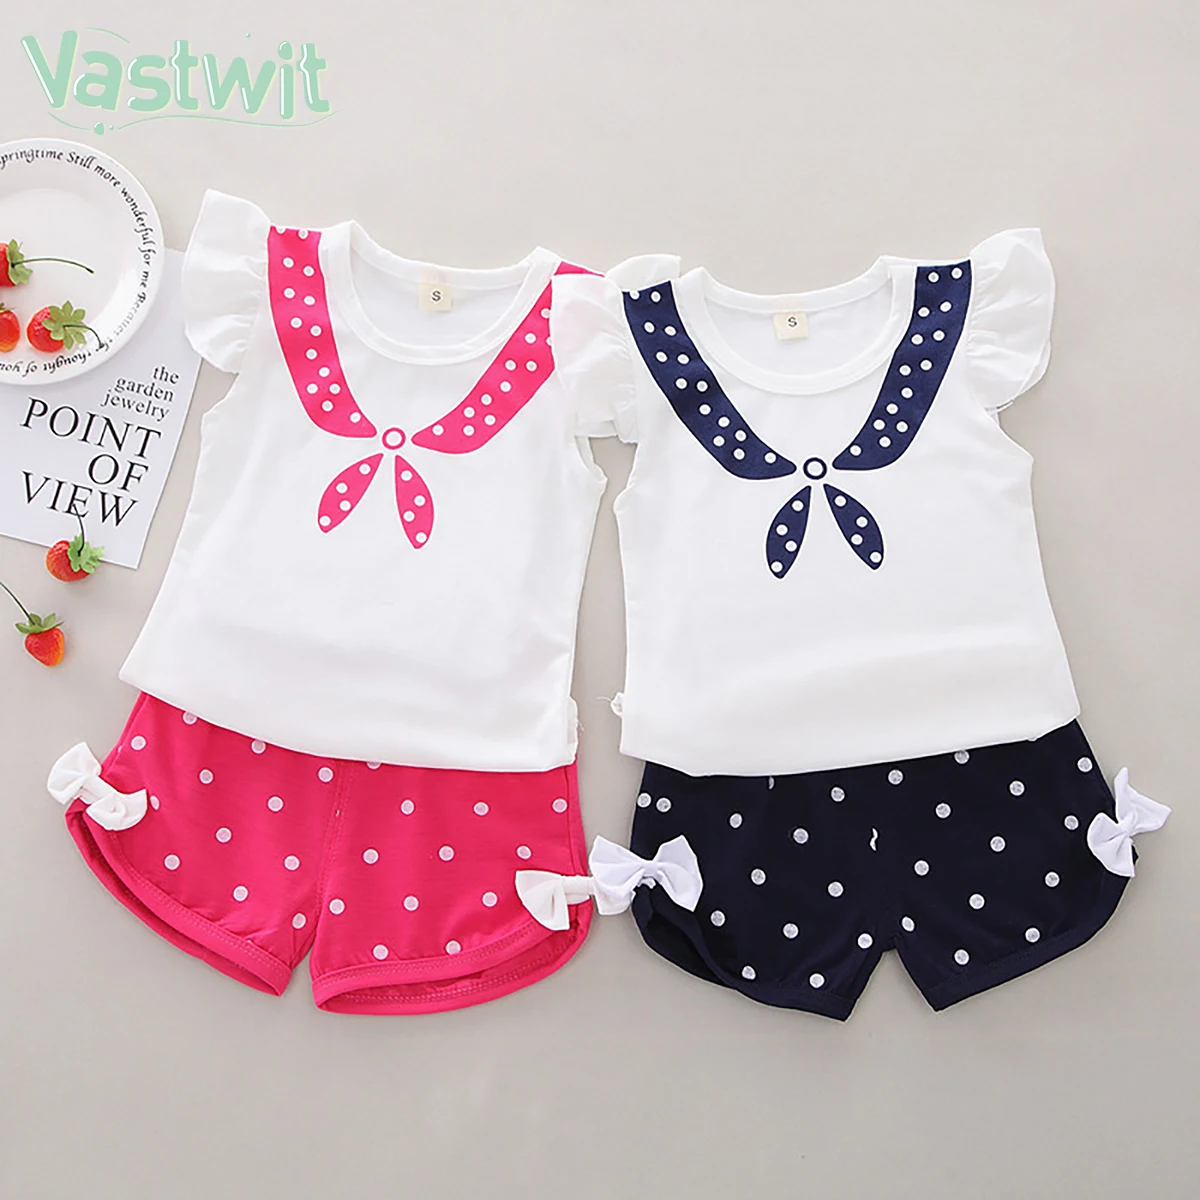 

Toddler Baby Summer Girls Clothes 1 2 3 Years Flying Sleeve T shirt+Polka Dots Shorts Girls Outfits Kids Clothing For Girls Sets